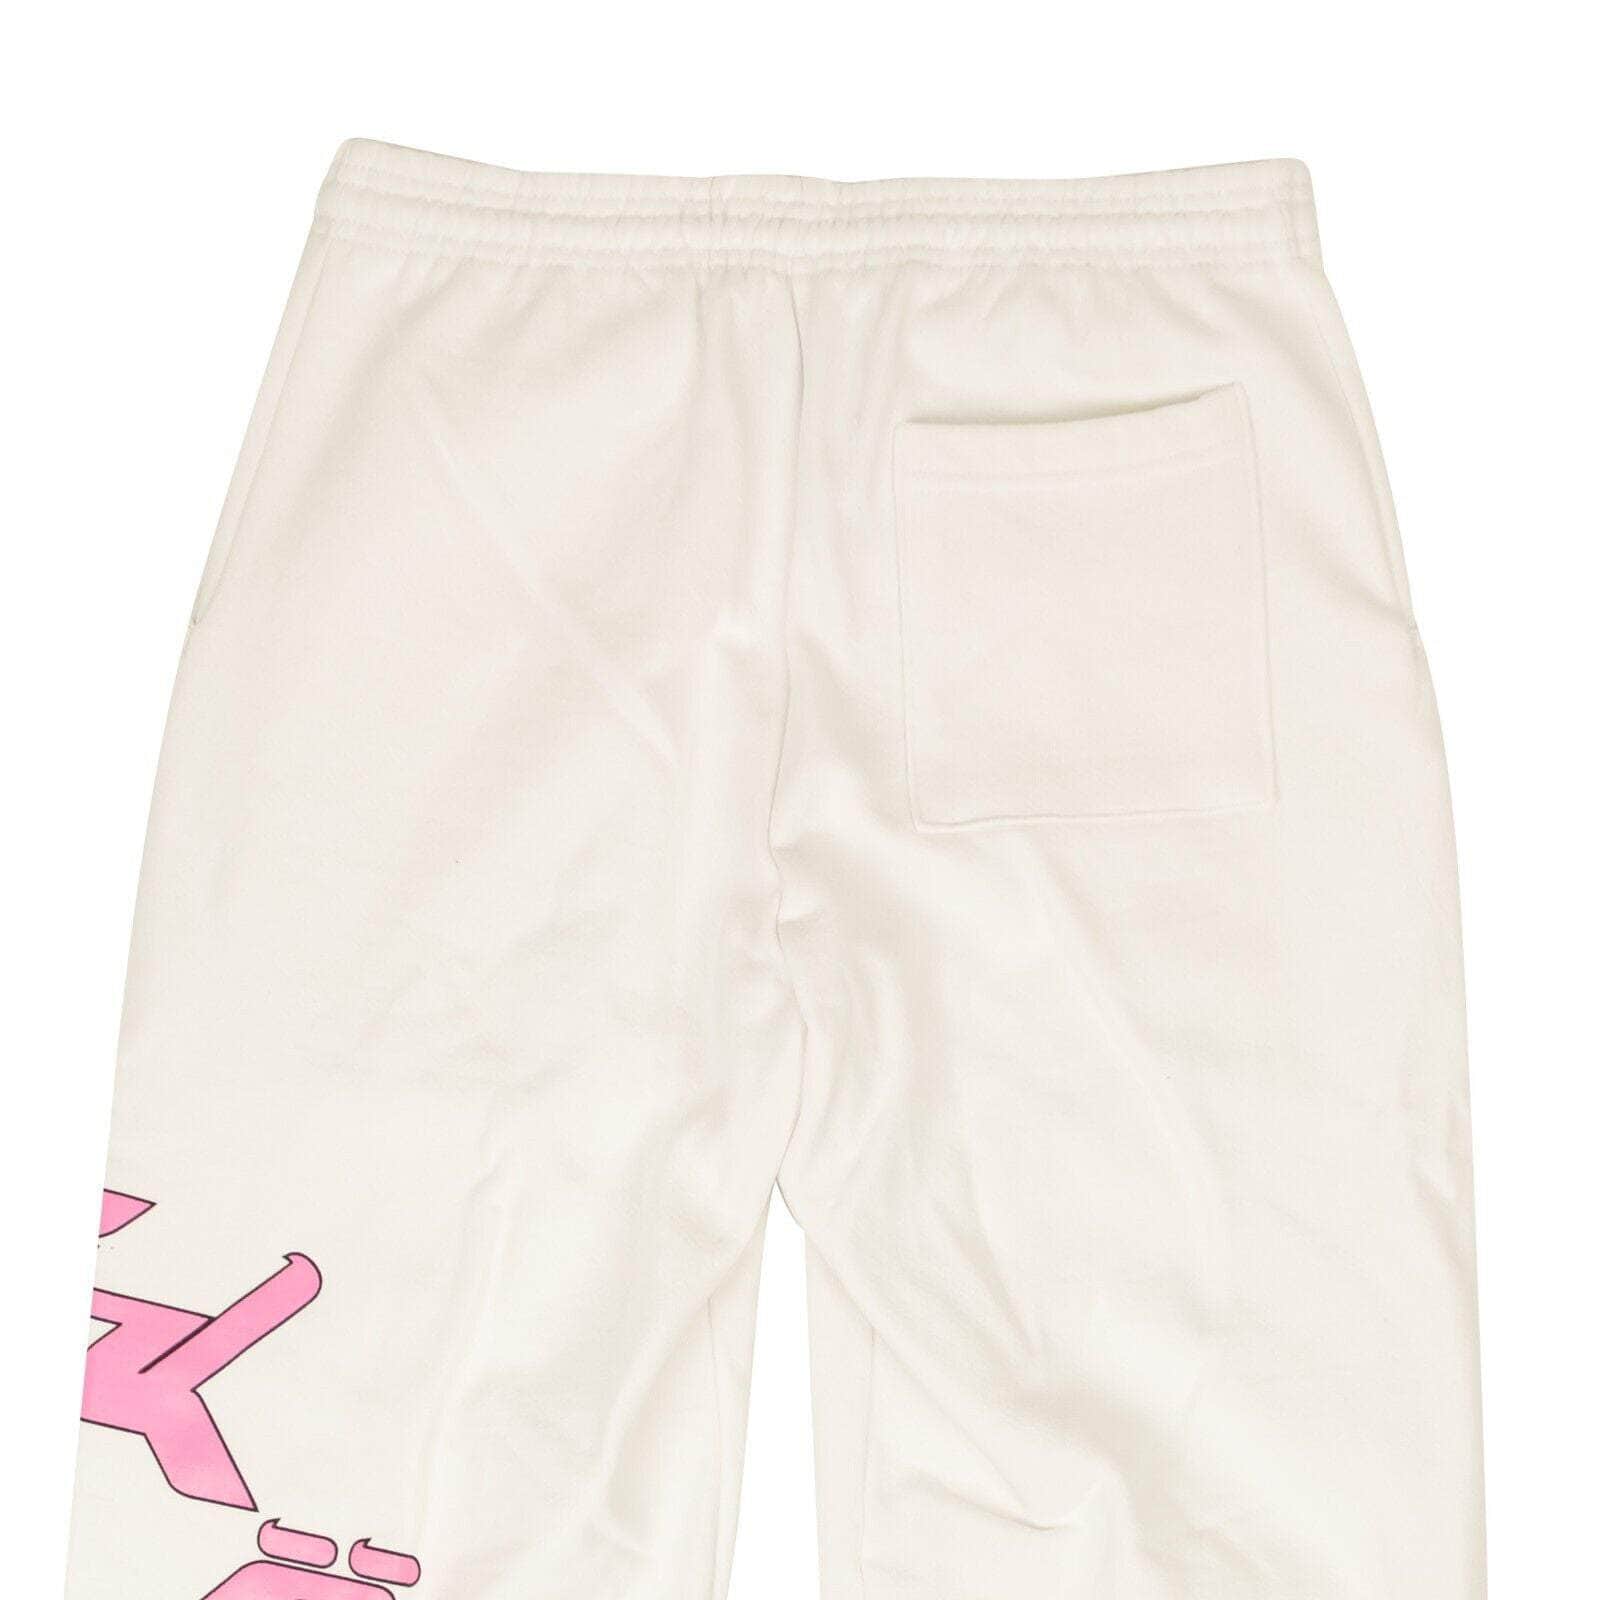 Sicko X 375 White And Pink Logo Sweatpants